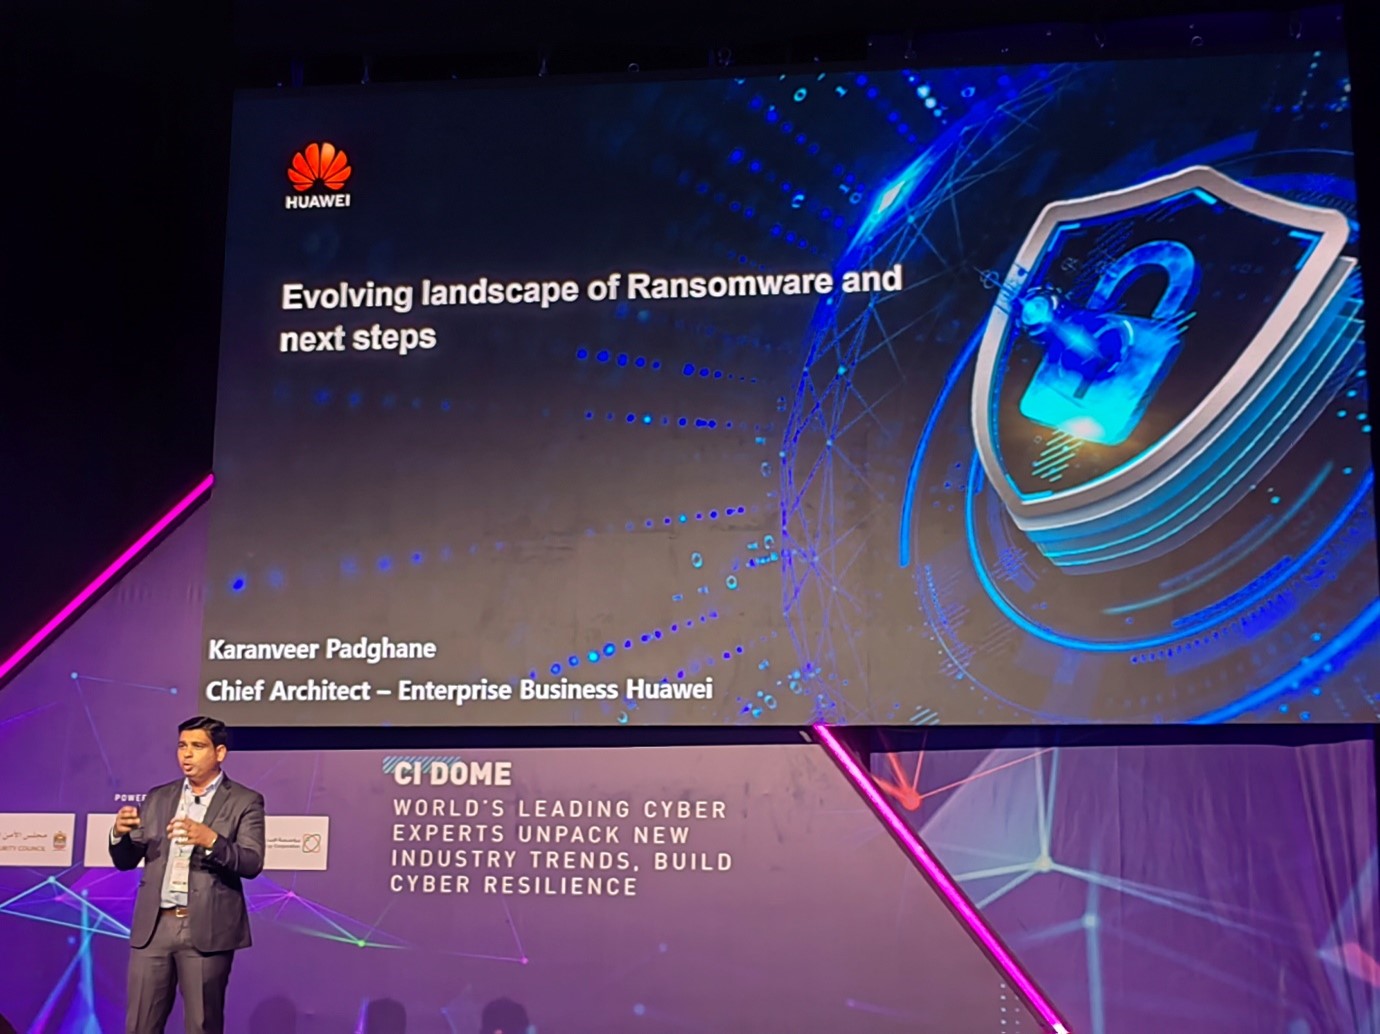 Karanveer Padghane, Chief Architect of Enterprise BG, Huawei Middle East & Central Asia 